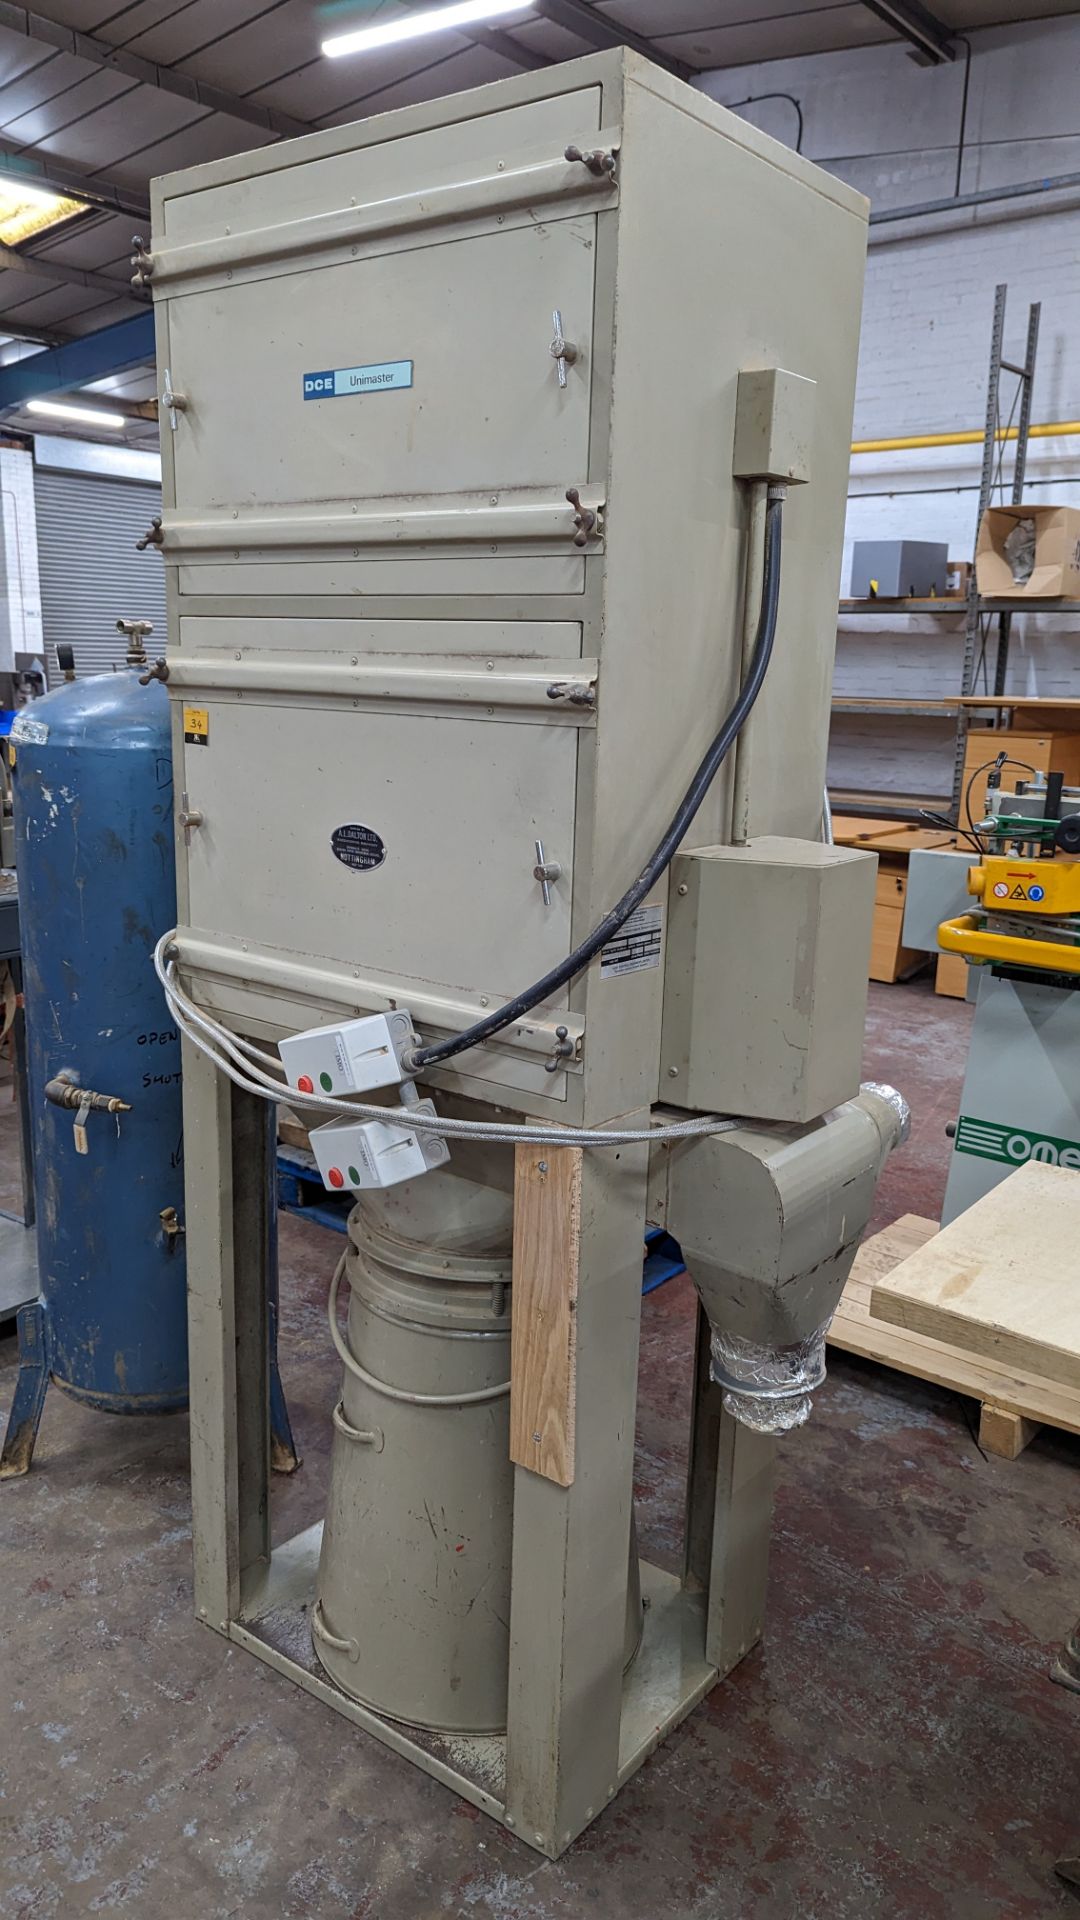 DCE Unimaster dust collector - Image 4 of 7